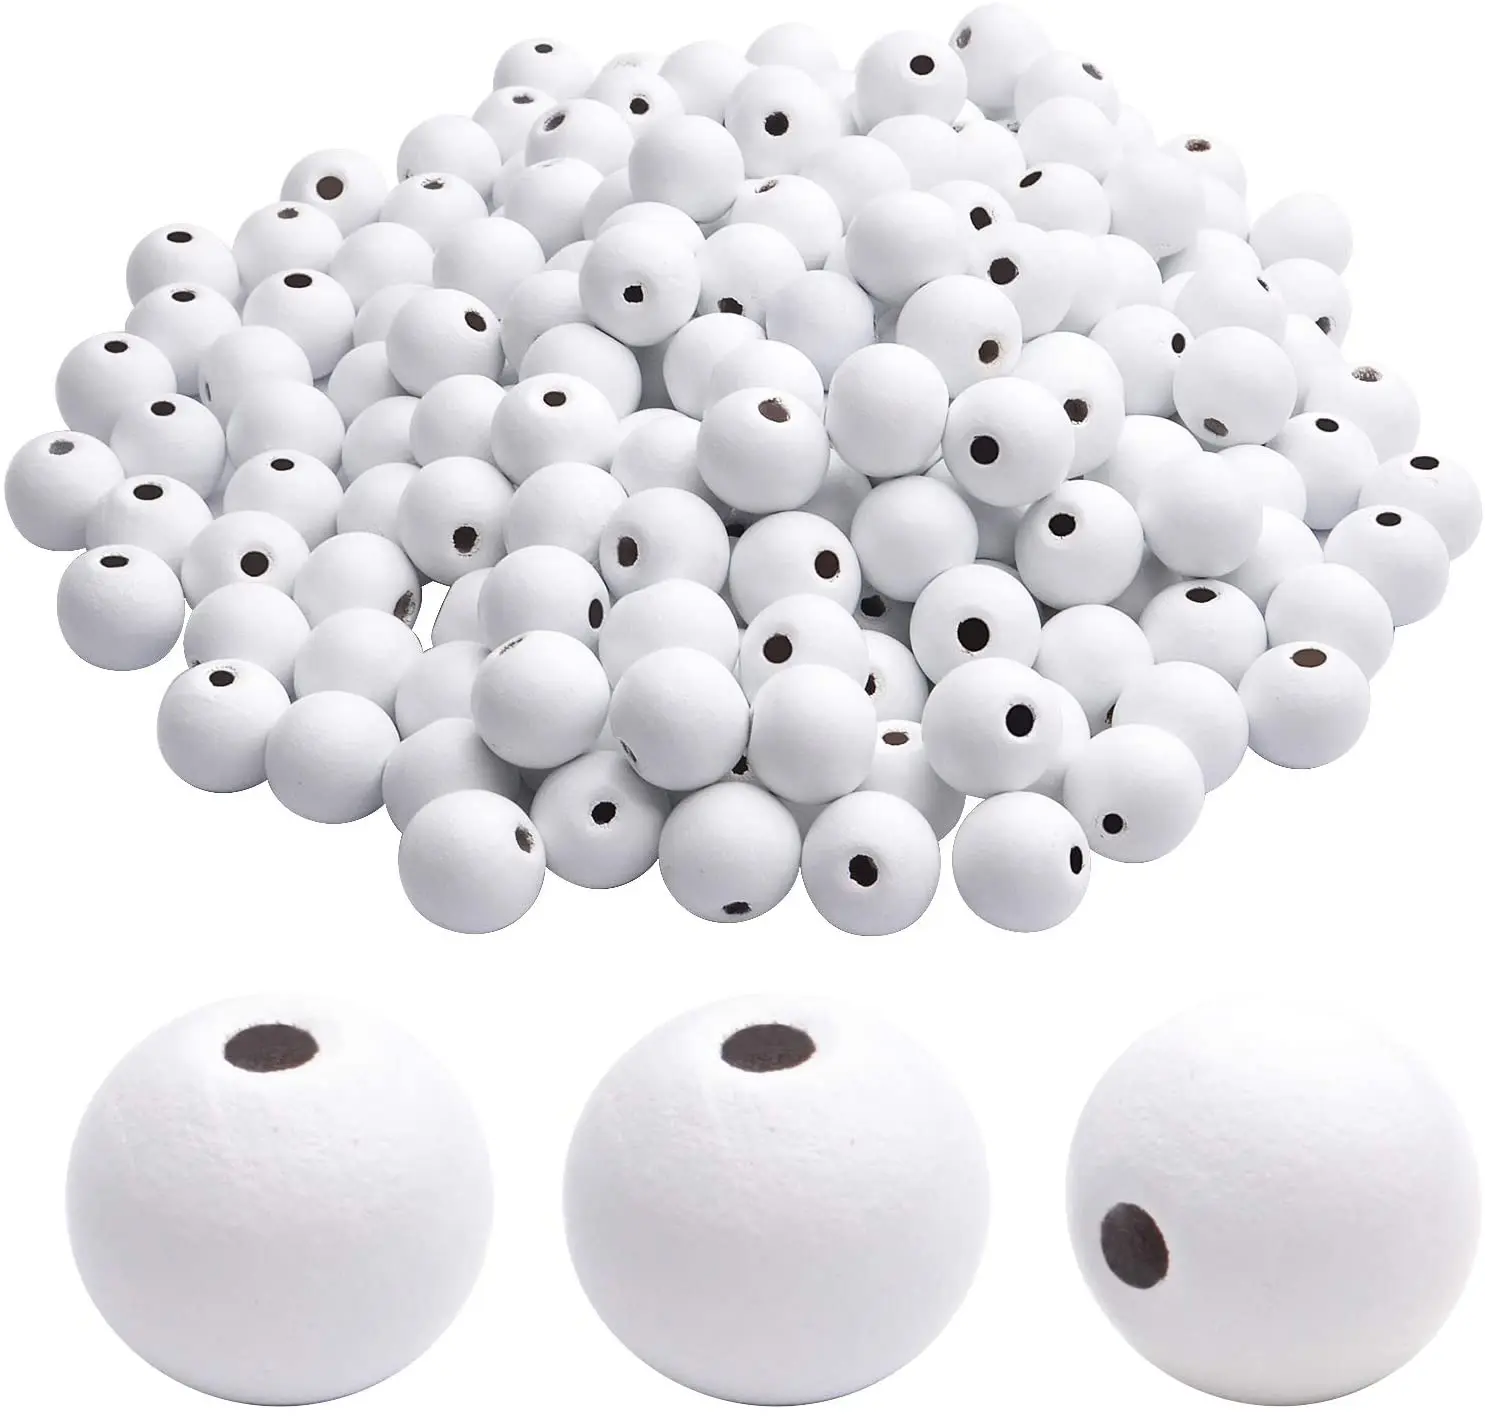 

200pcs 12mm White Wooden Round Beads Natural Unfinished Loose Beads Spacer Beading for Crafts Jewelry Making, White, 2.5mm Hole